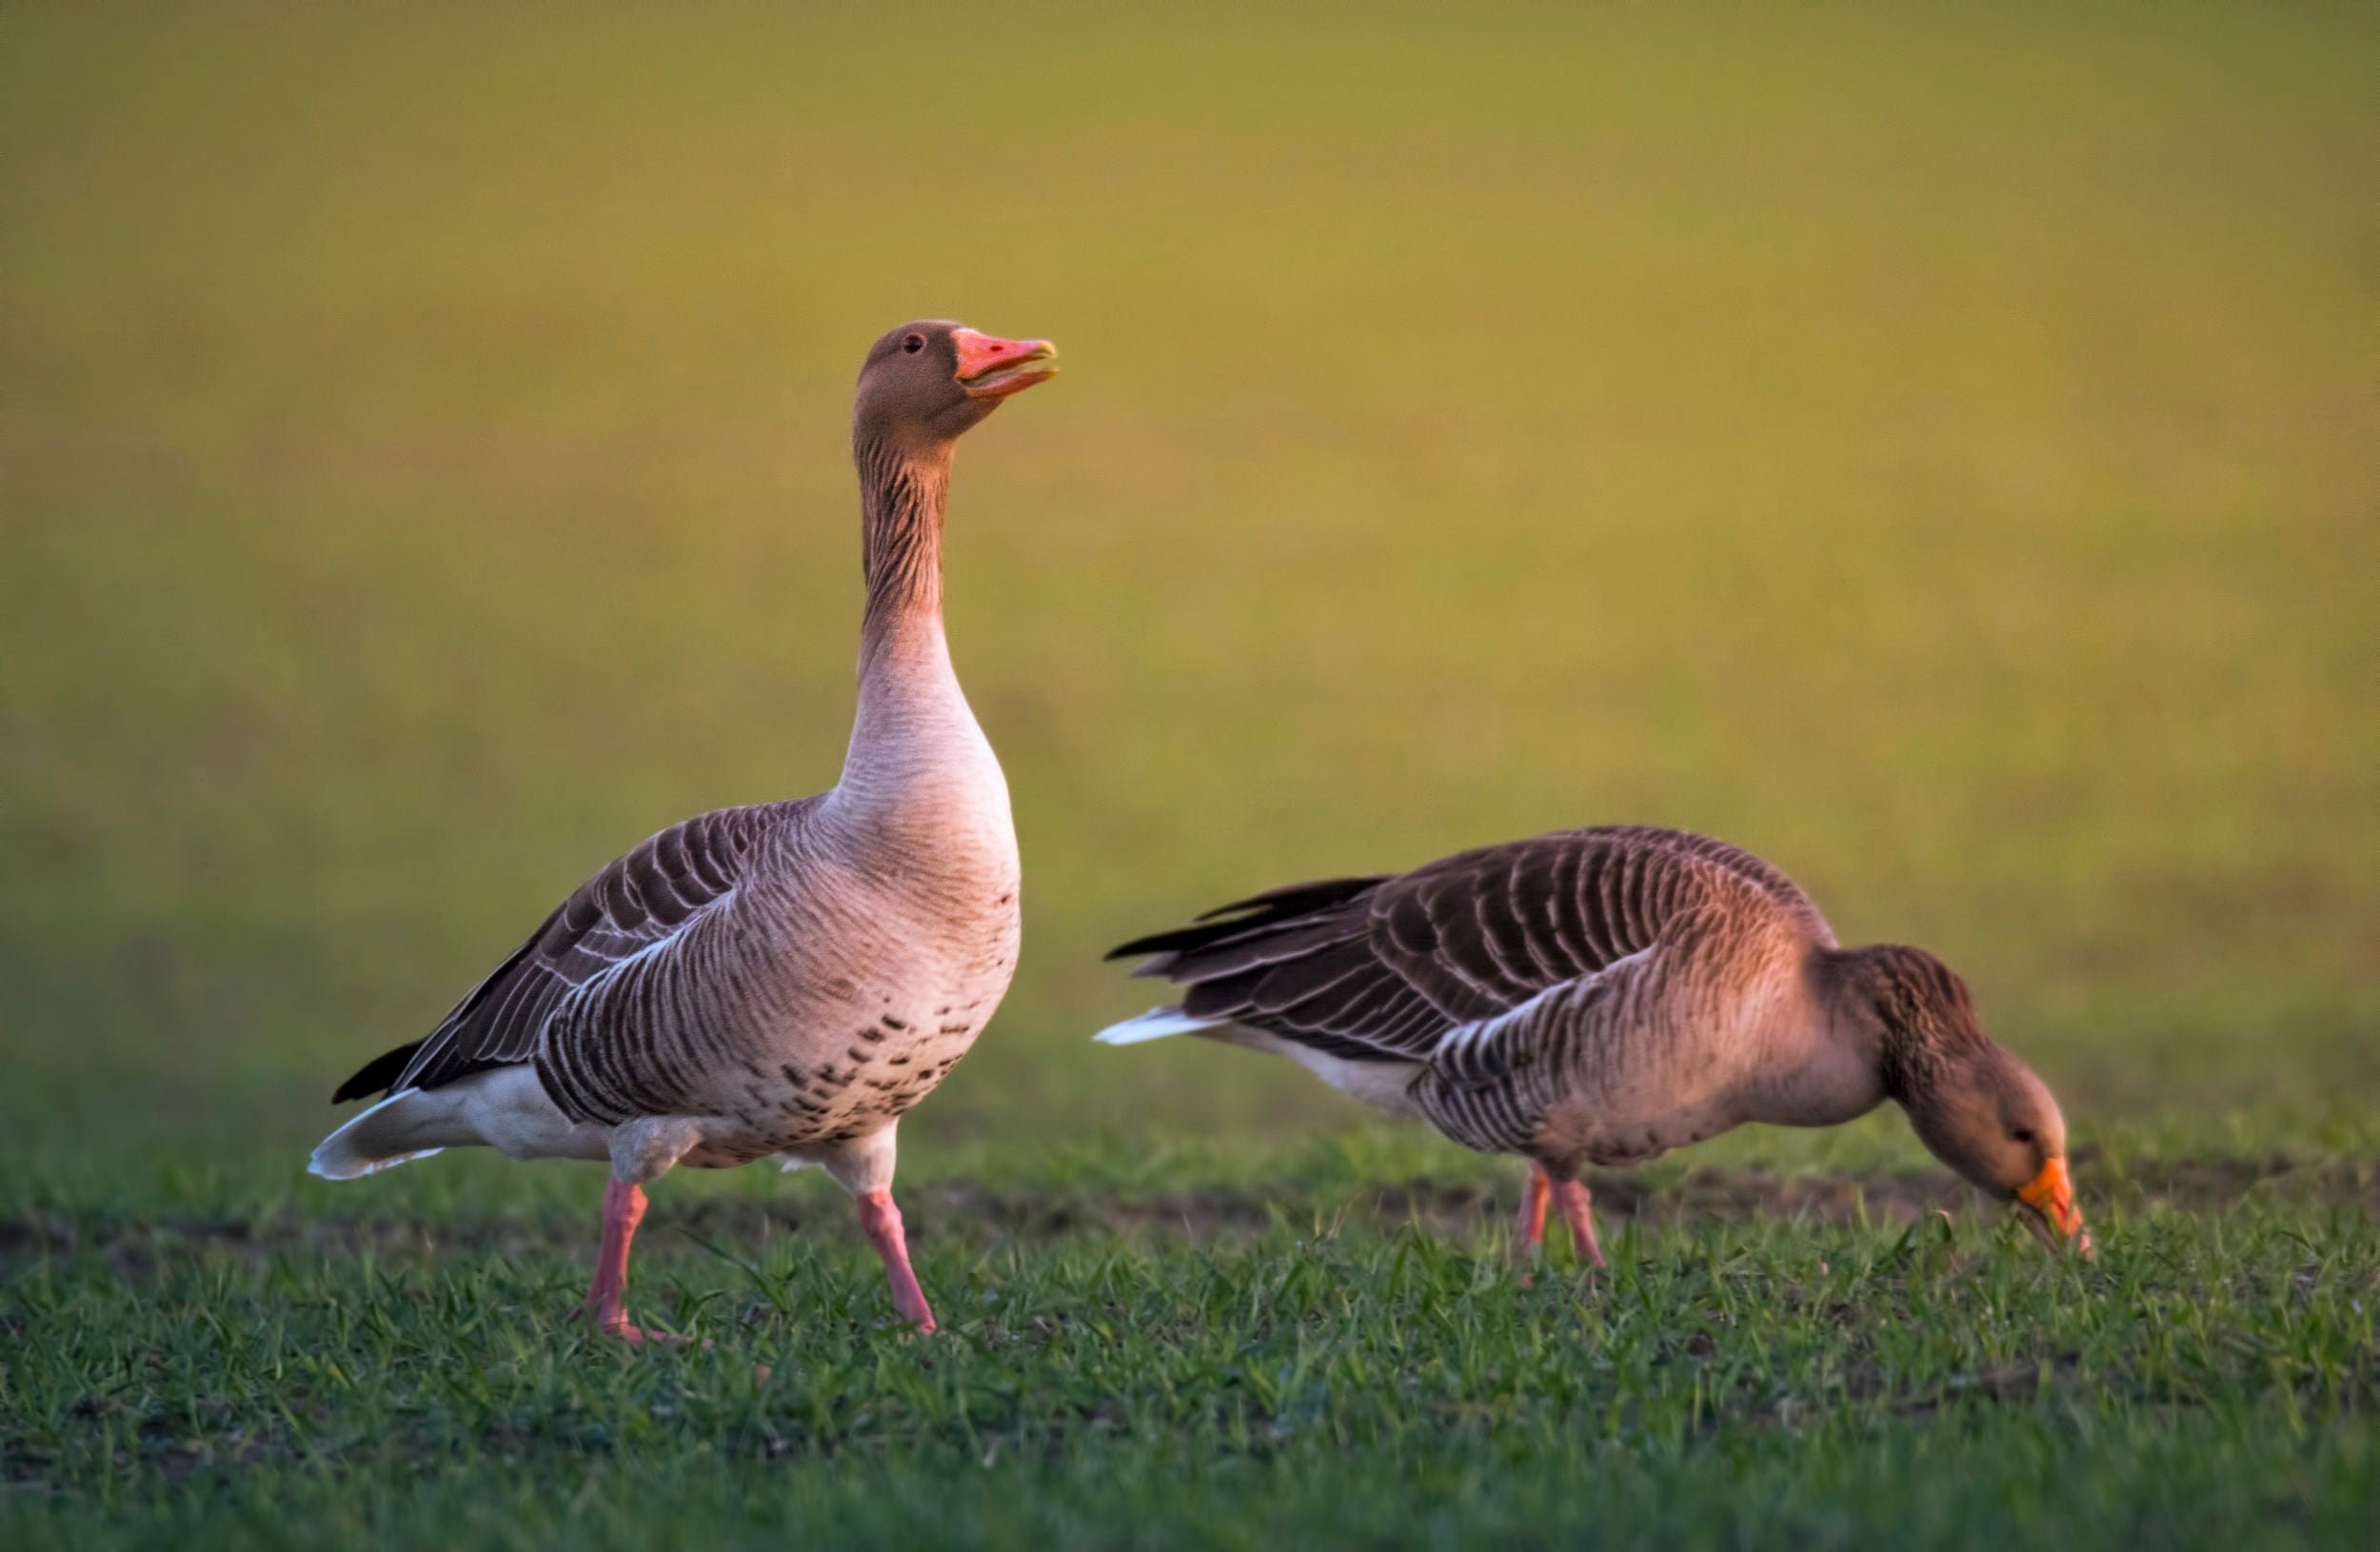 Greylag Goose, HD wallpapers, Detailed feathers, Baltana collection, 2500x1630 HD Desktop